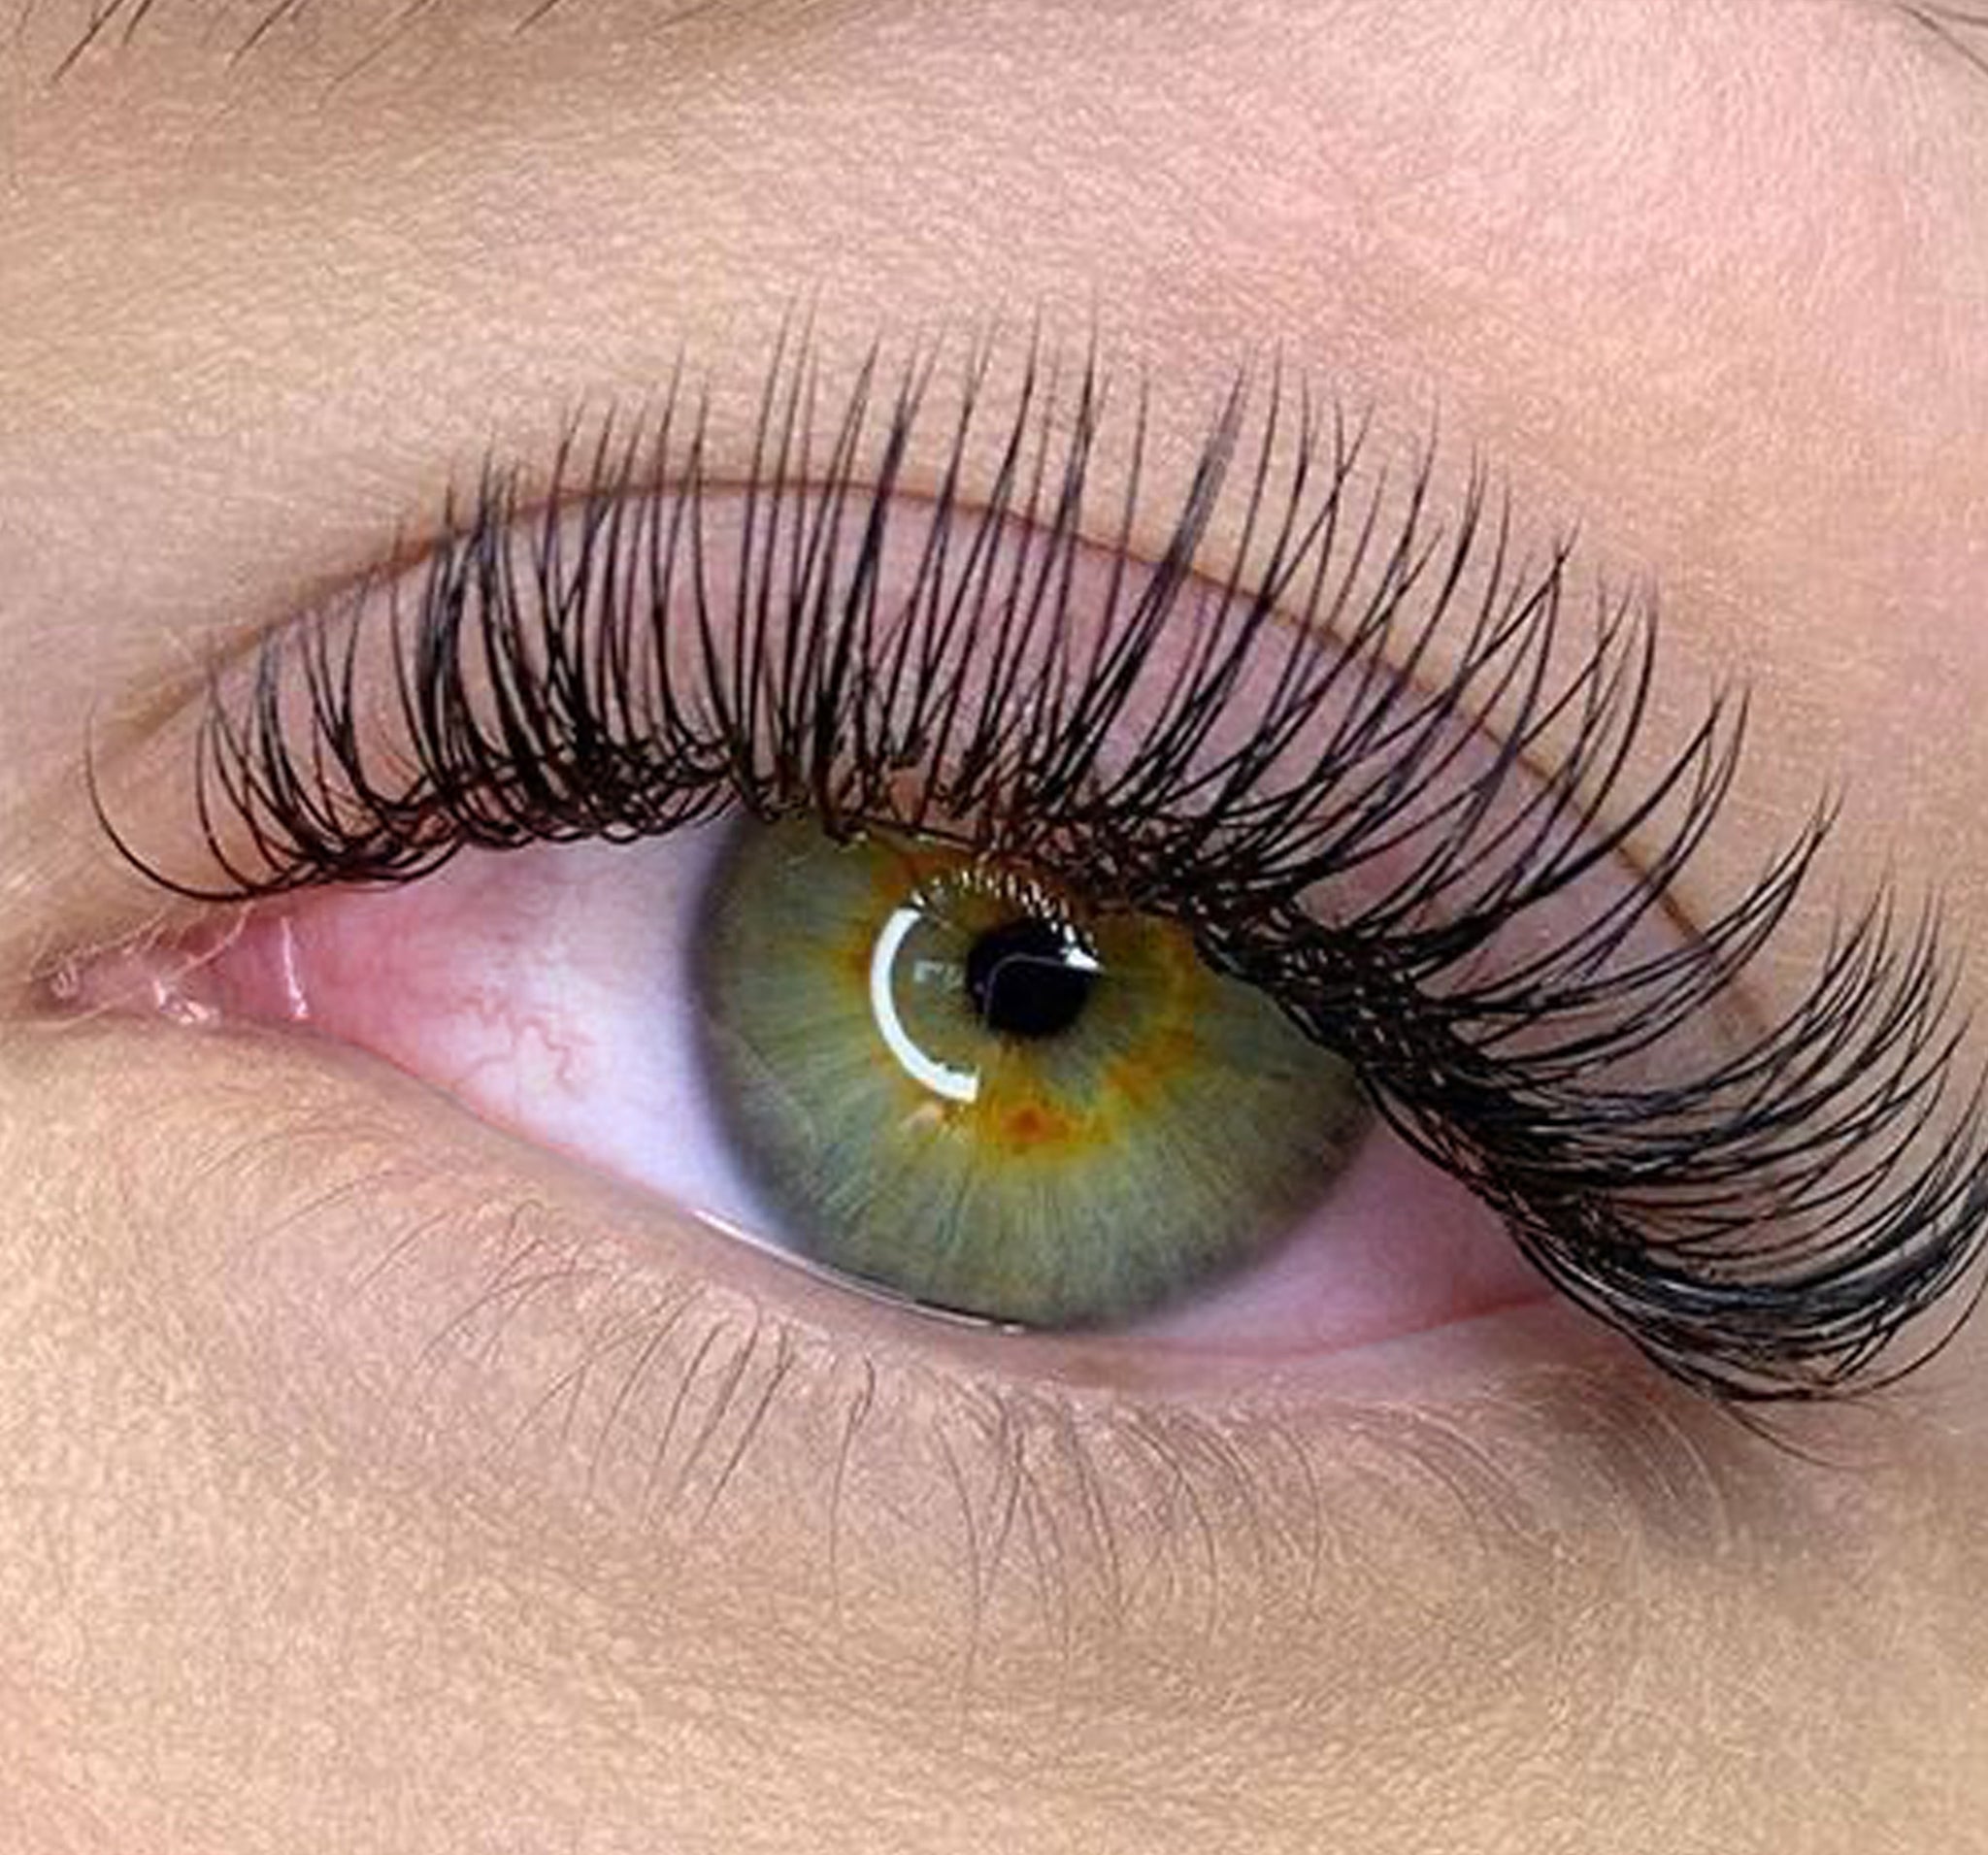 Allergic reaction after eyelash extensions